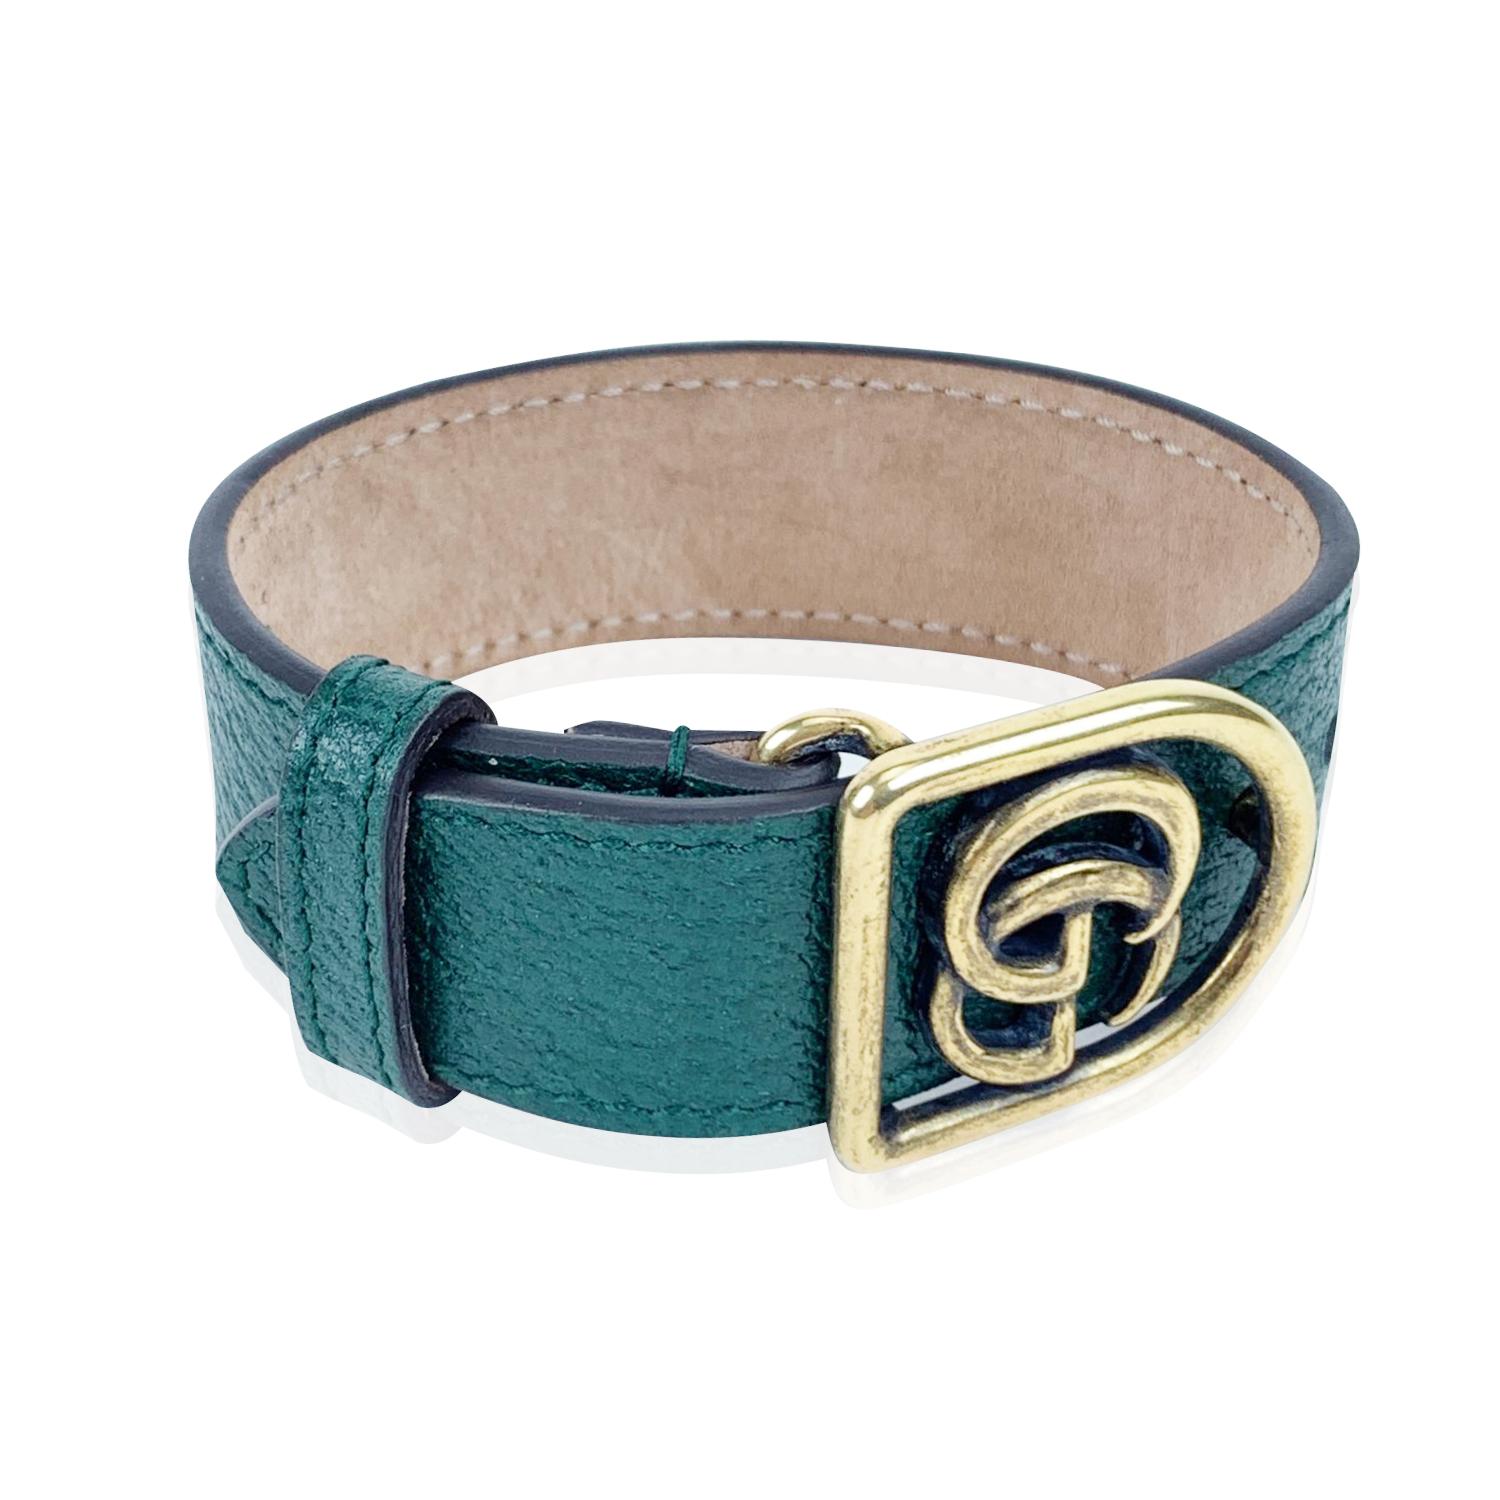 Beautiful belt bracelet by Gucci. Made in green leather, it features an aged gold metal GG Marmont logo buckle. Size: L. 3 holes adjustment. Total length (from end to end): 11 inches - 27.94 cm. Max circumference: 8.25 inches - 21 cm. Min.